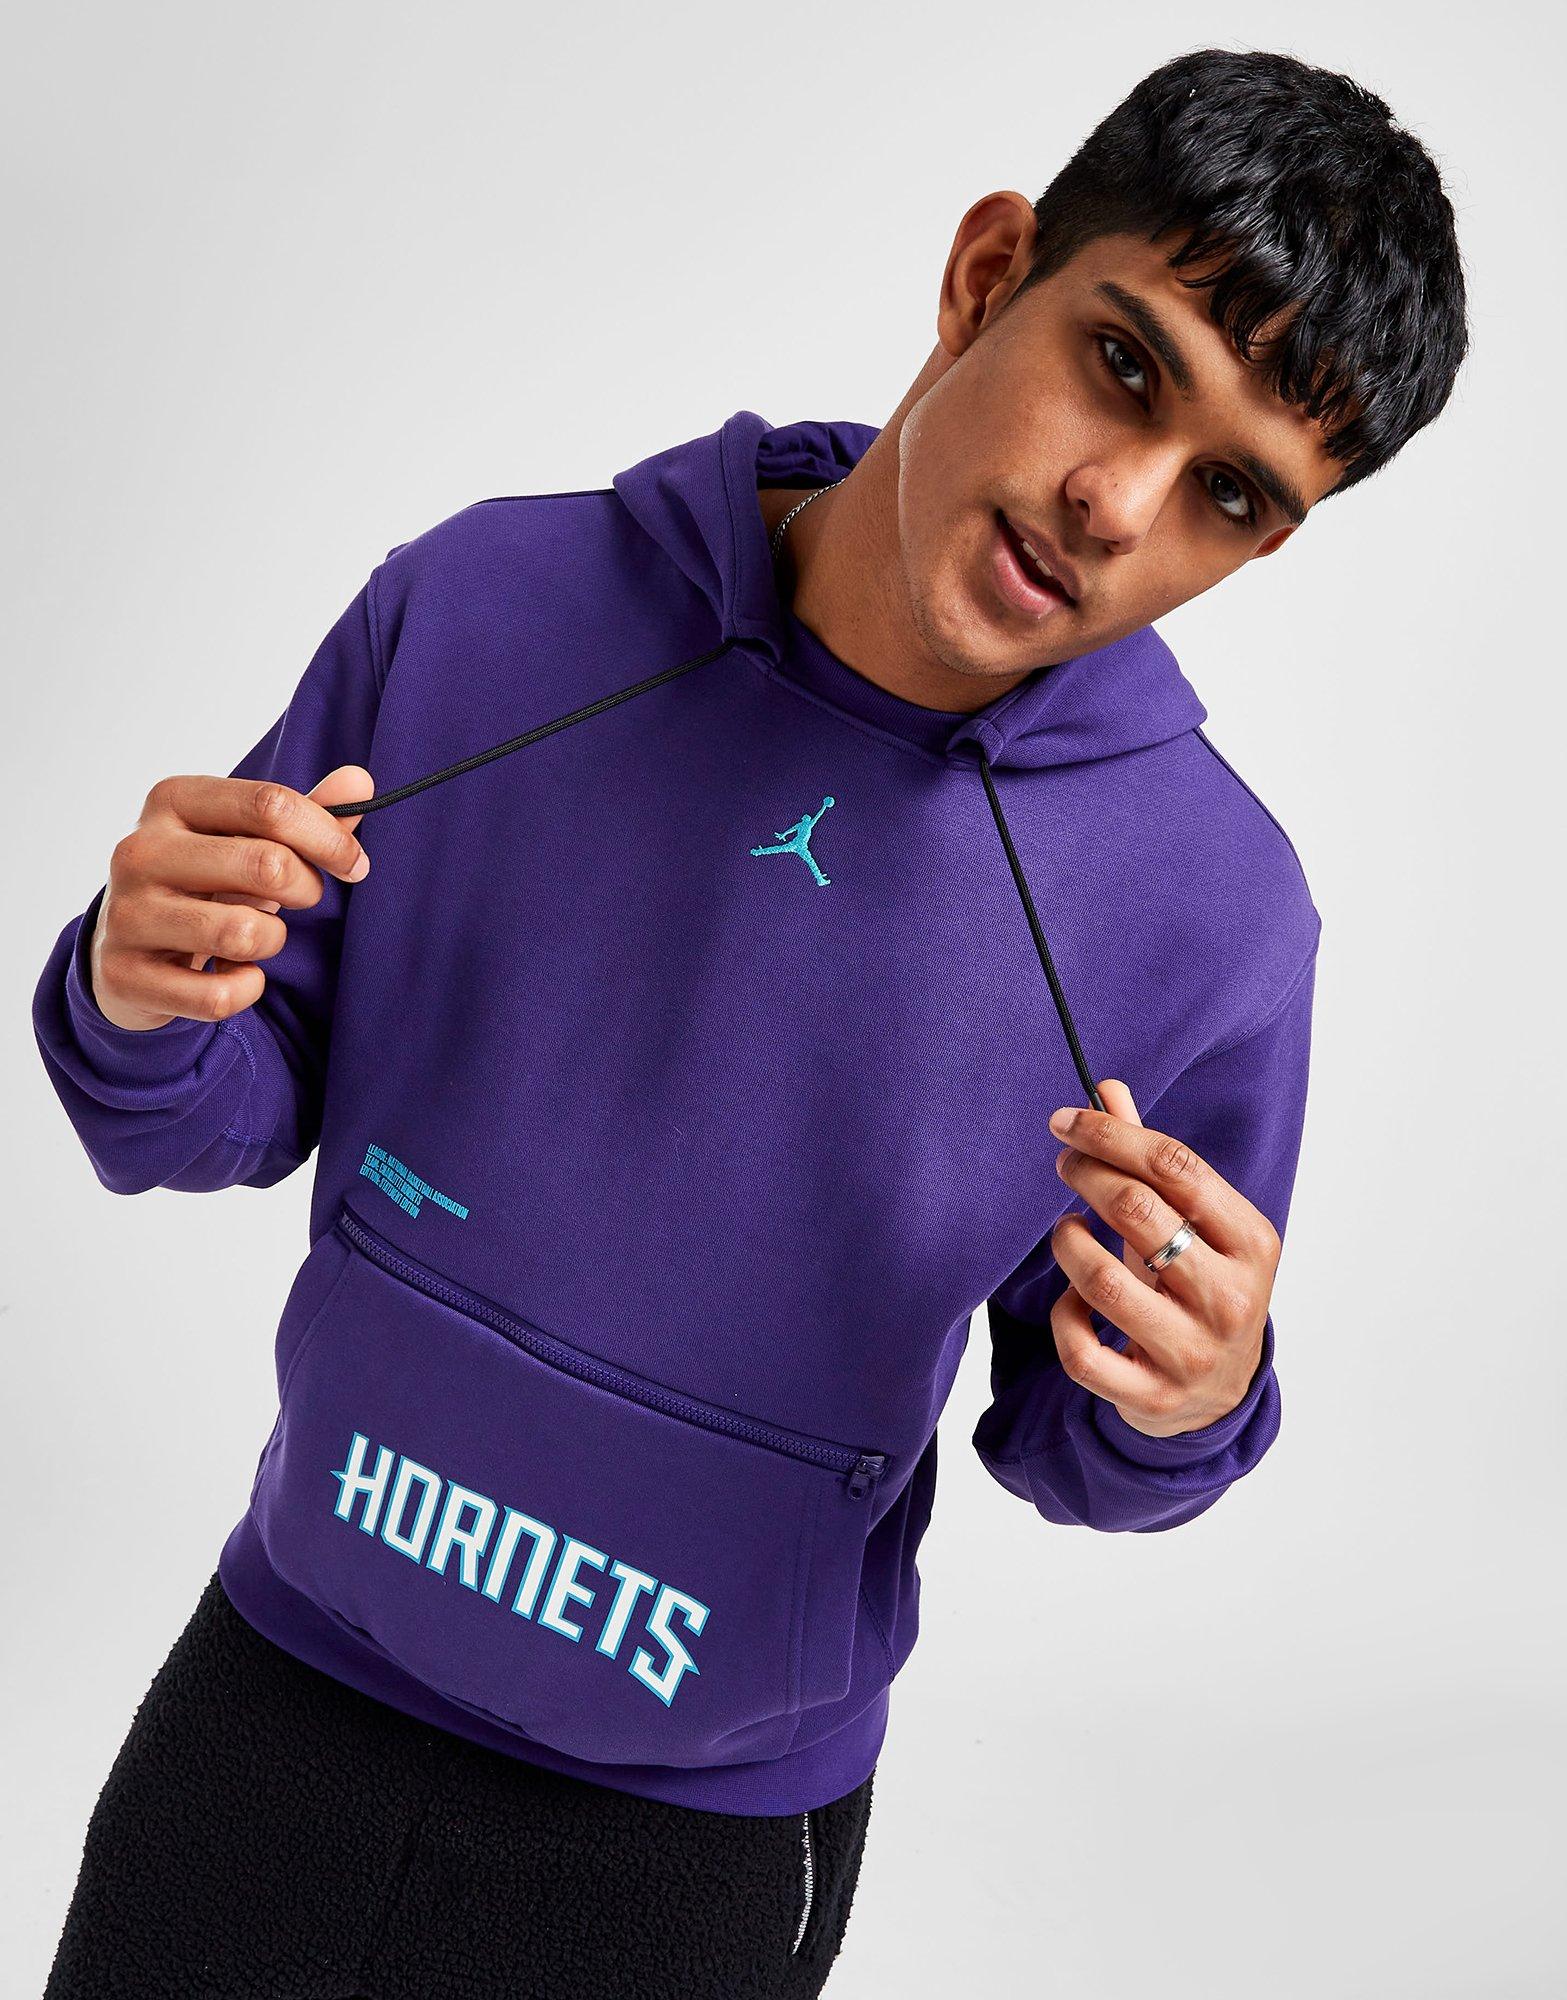 Charlotte Hornets - Only 2 more days to get this Jordan full-zip